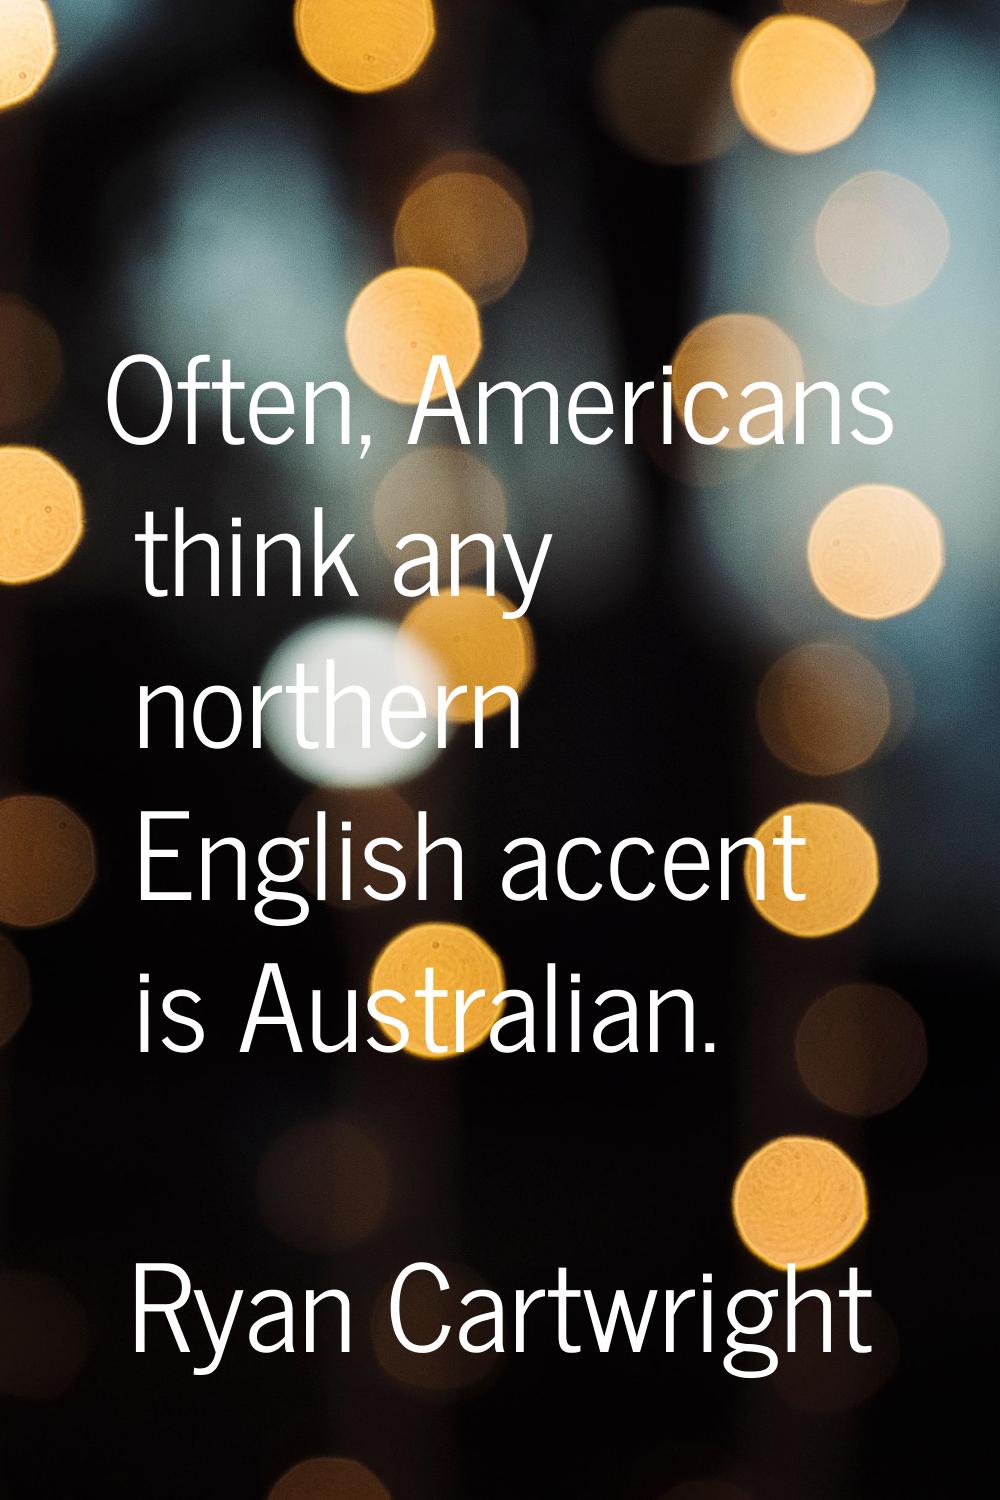 Often, Americans think any northern English accent is Australian.